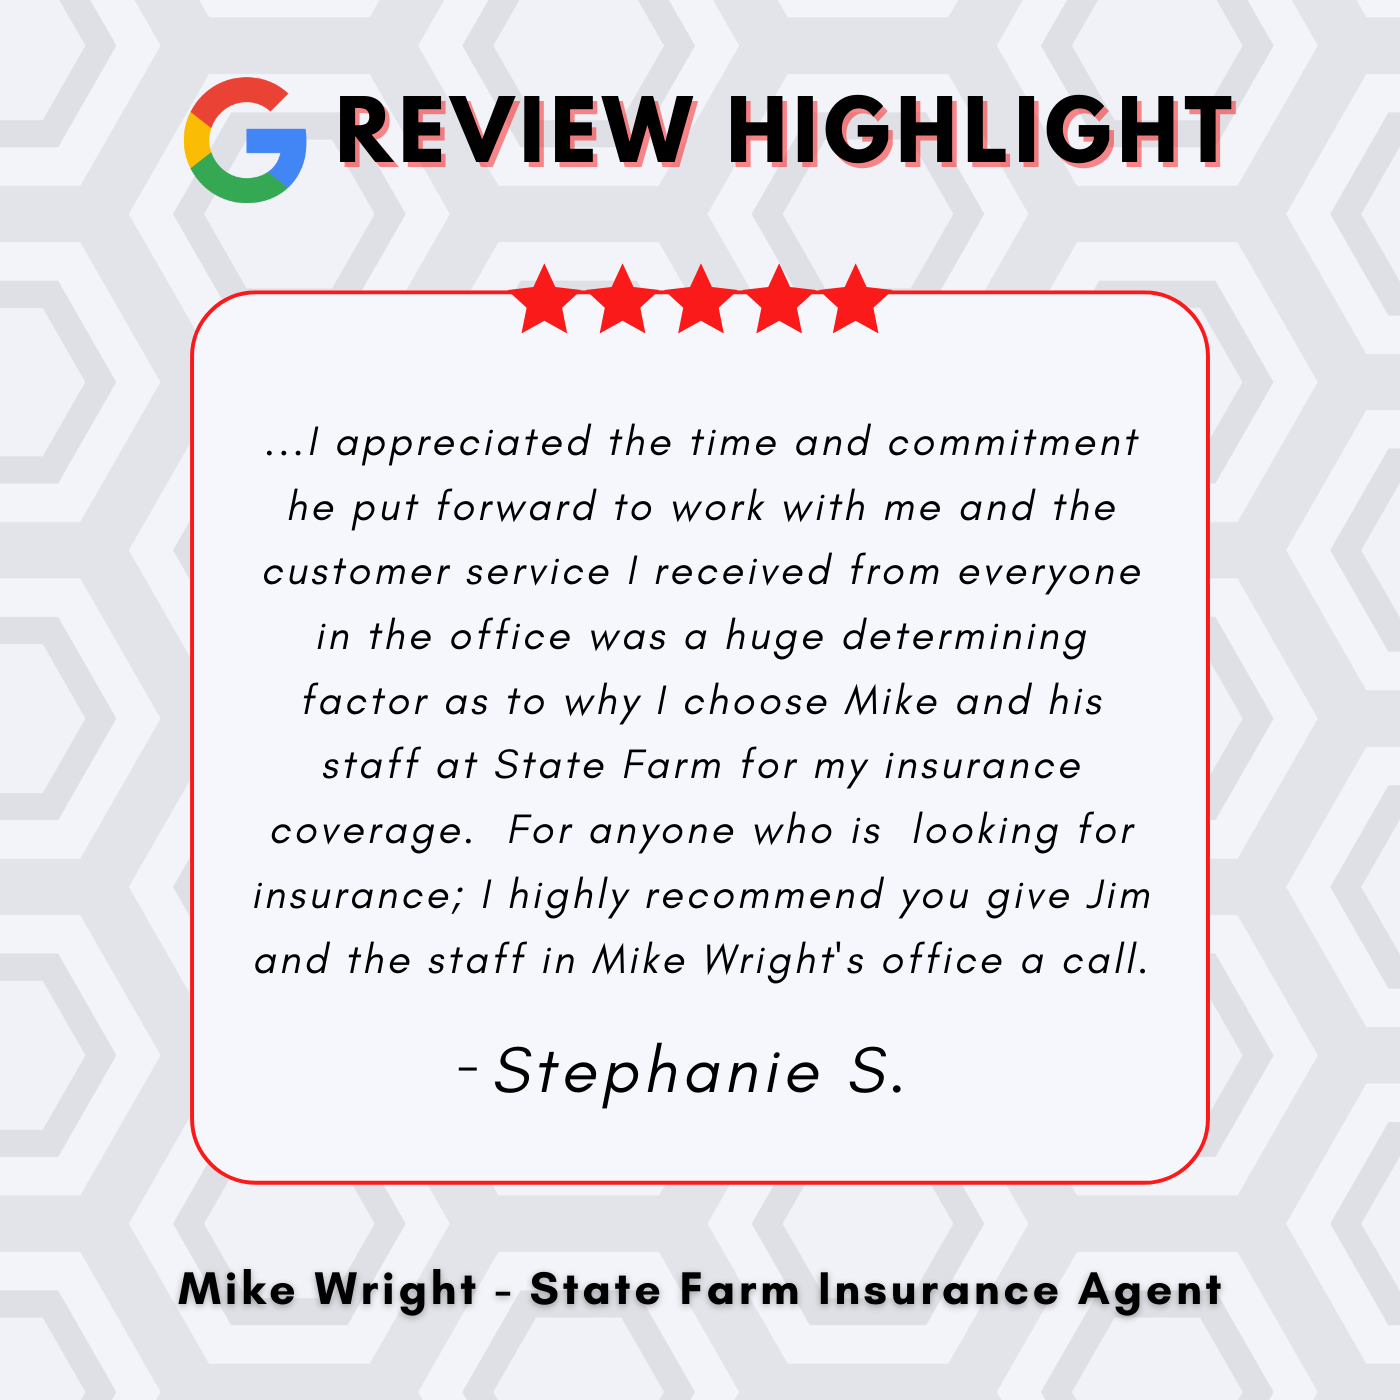 Mike Wright - State Farm Insurance Agent